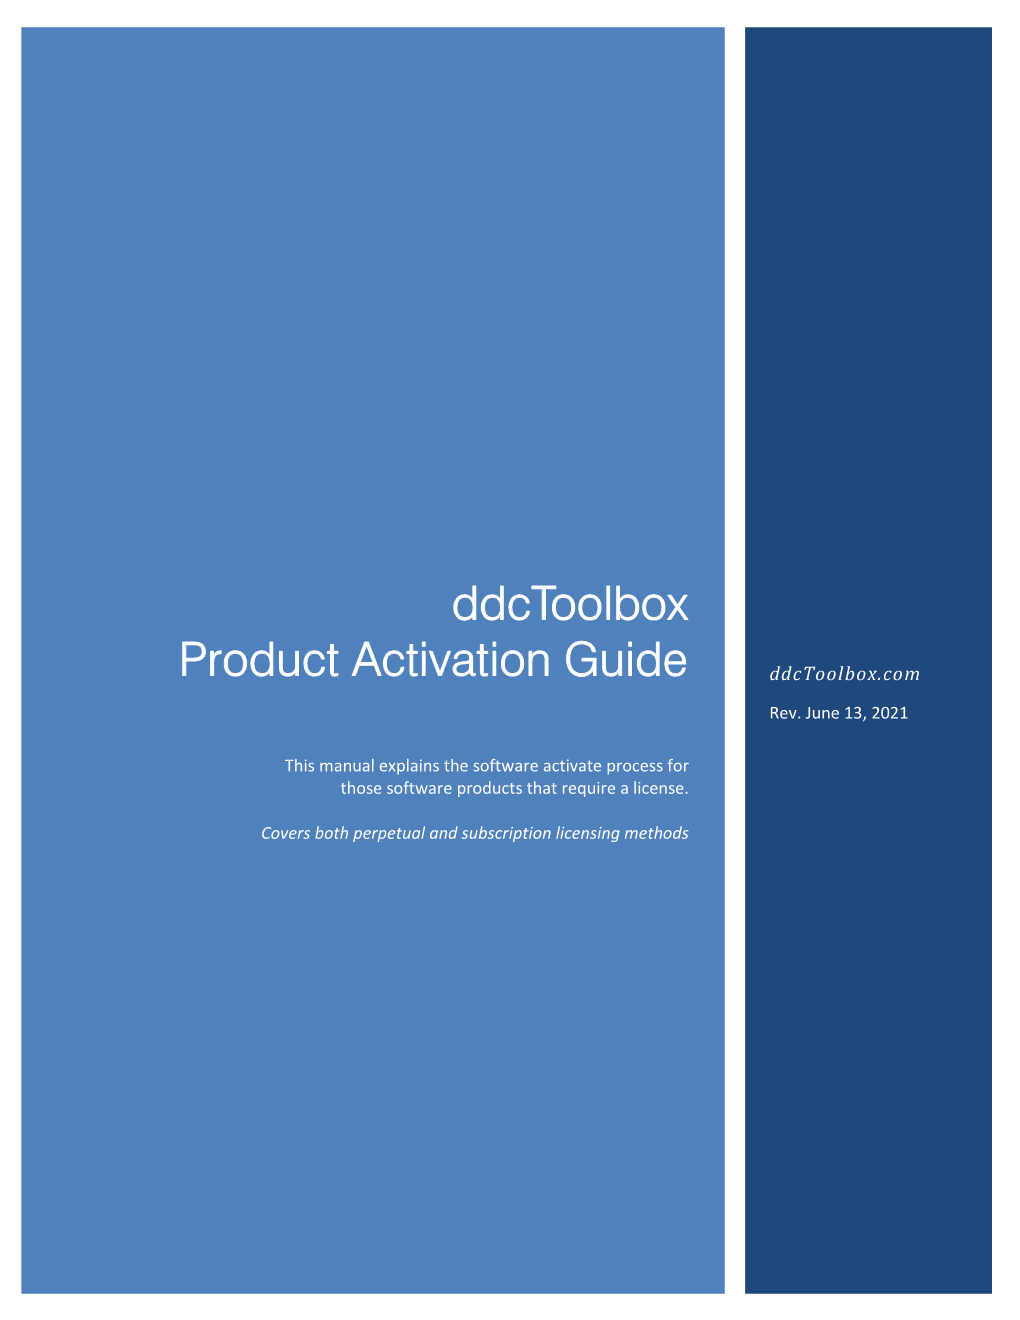 Ddctoolbox Product Activation Guide.Pdf